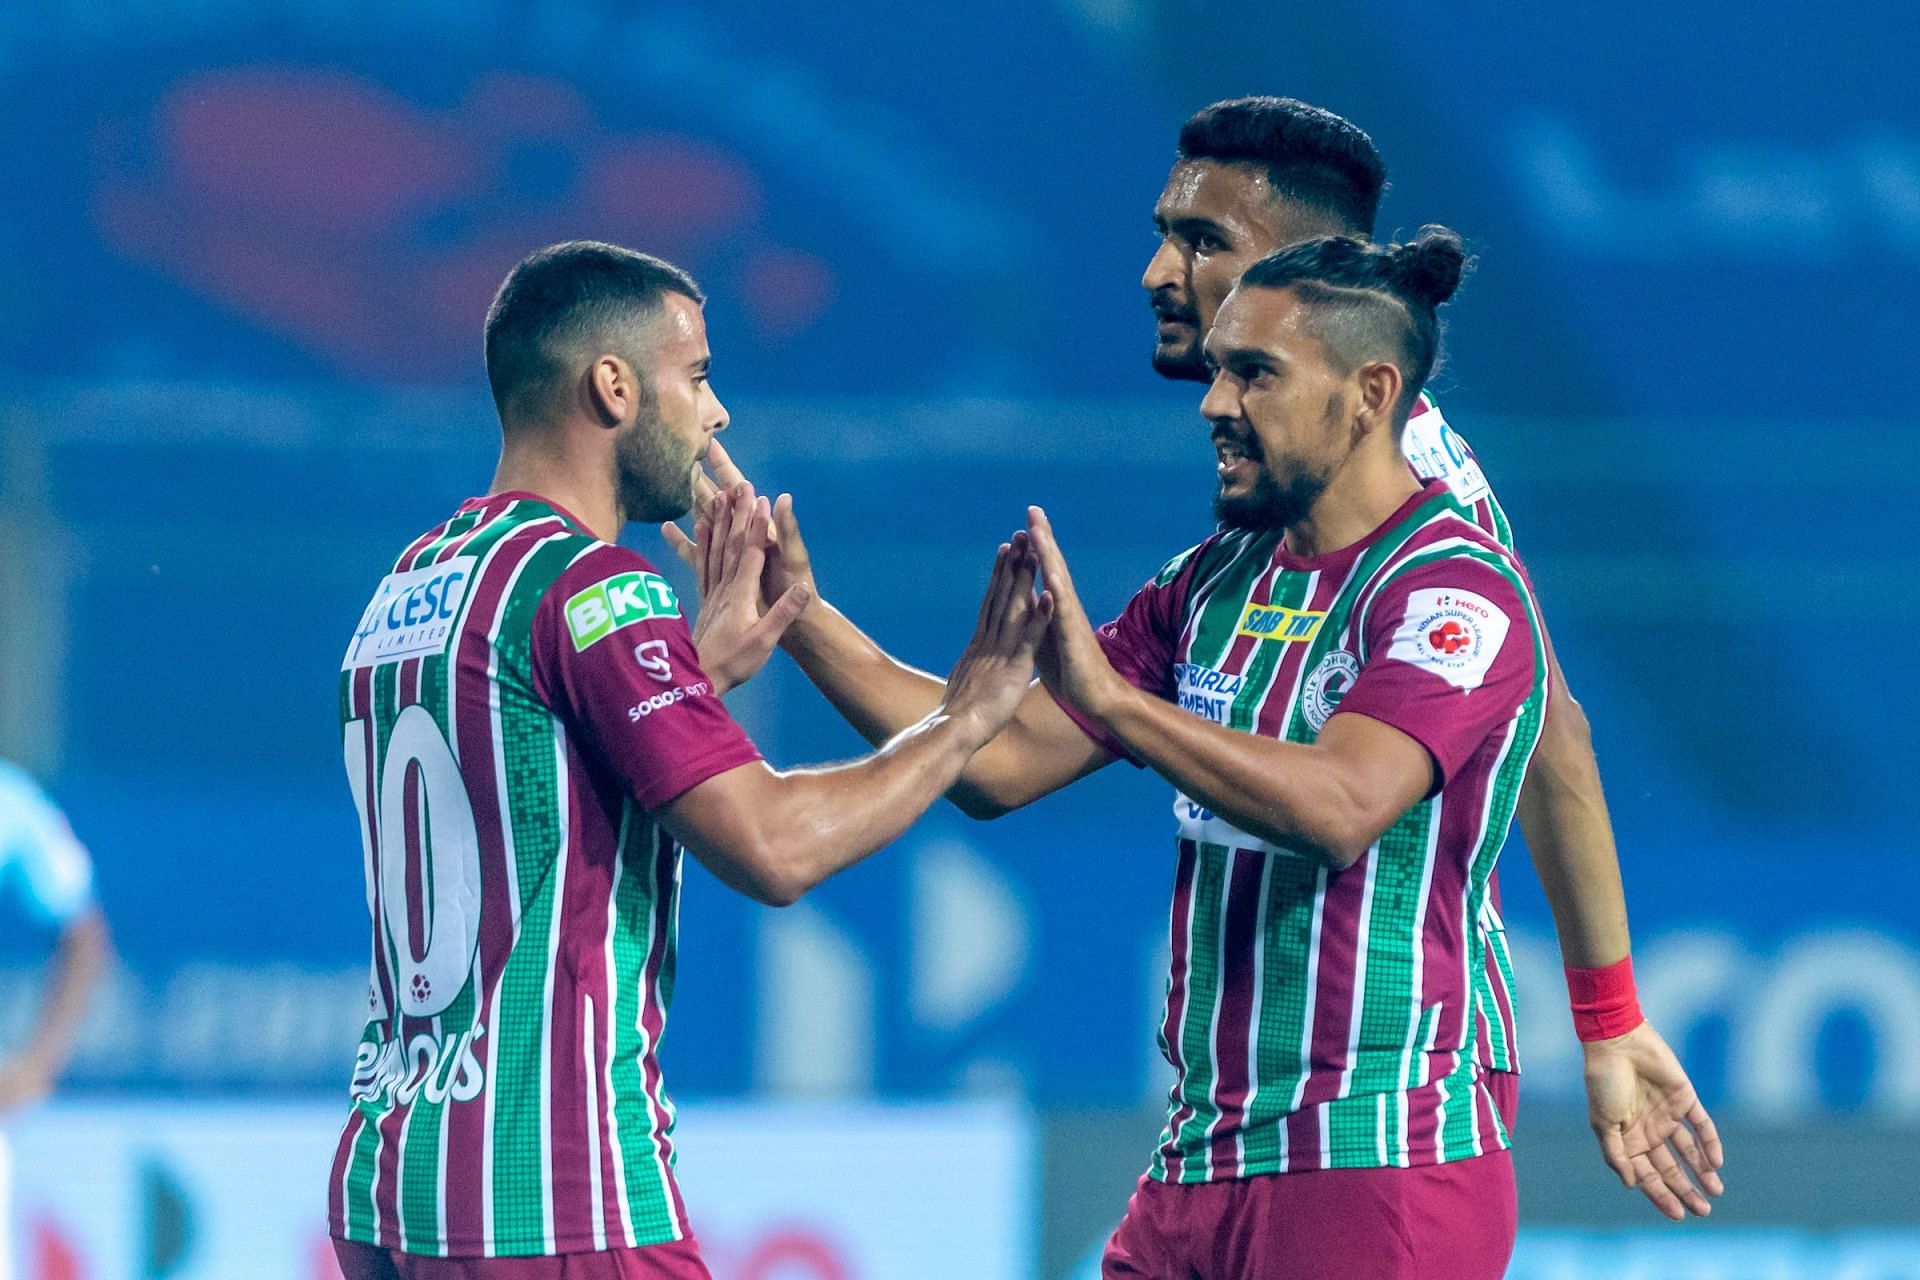 ATK Mohun Bagan will take on a dominant Hyderabad FC in their next match in the ISL (Image Courtesy: ISL)